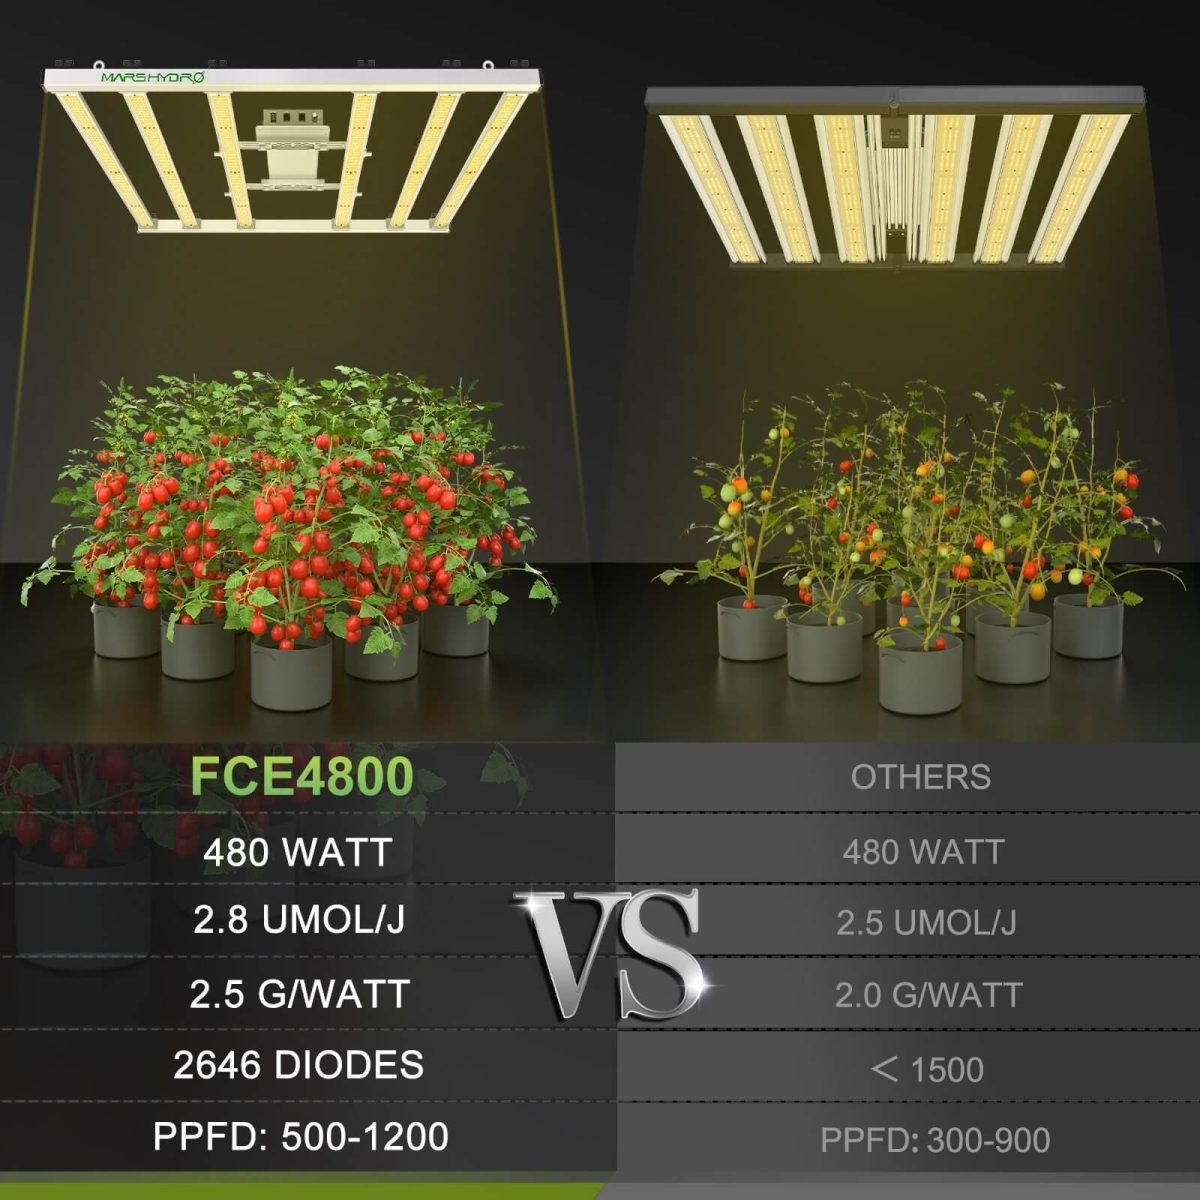 FC-E4800 led grow light is much better than other 480w lights in PPFD, diode brand, PPE, max yield.